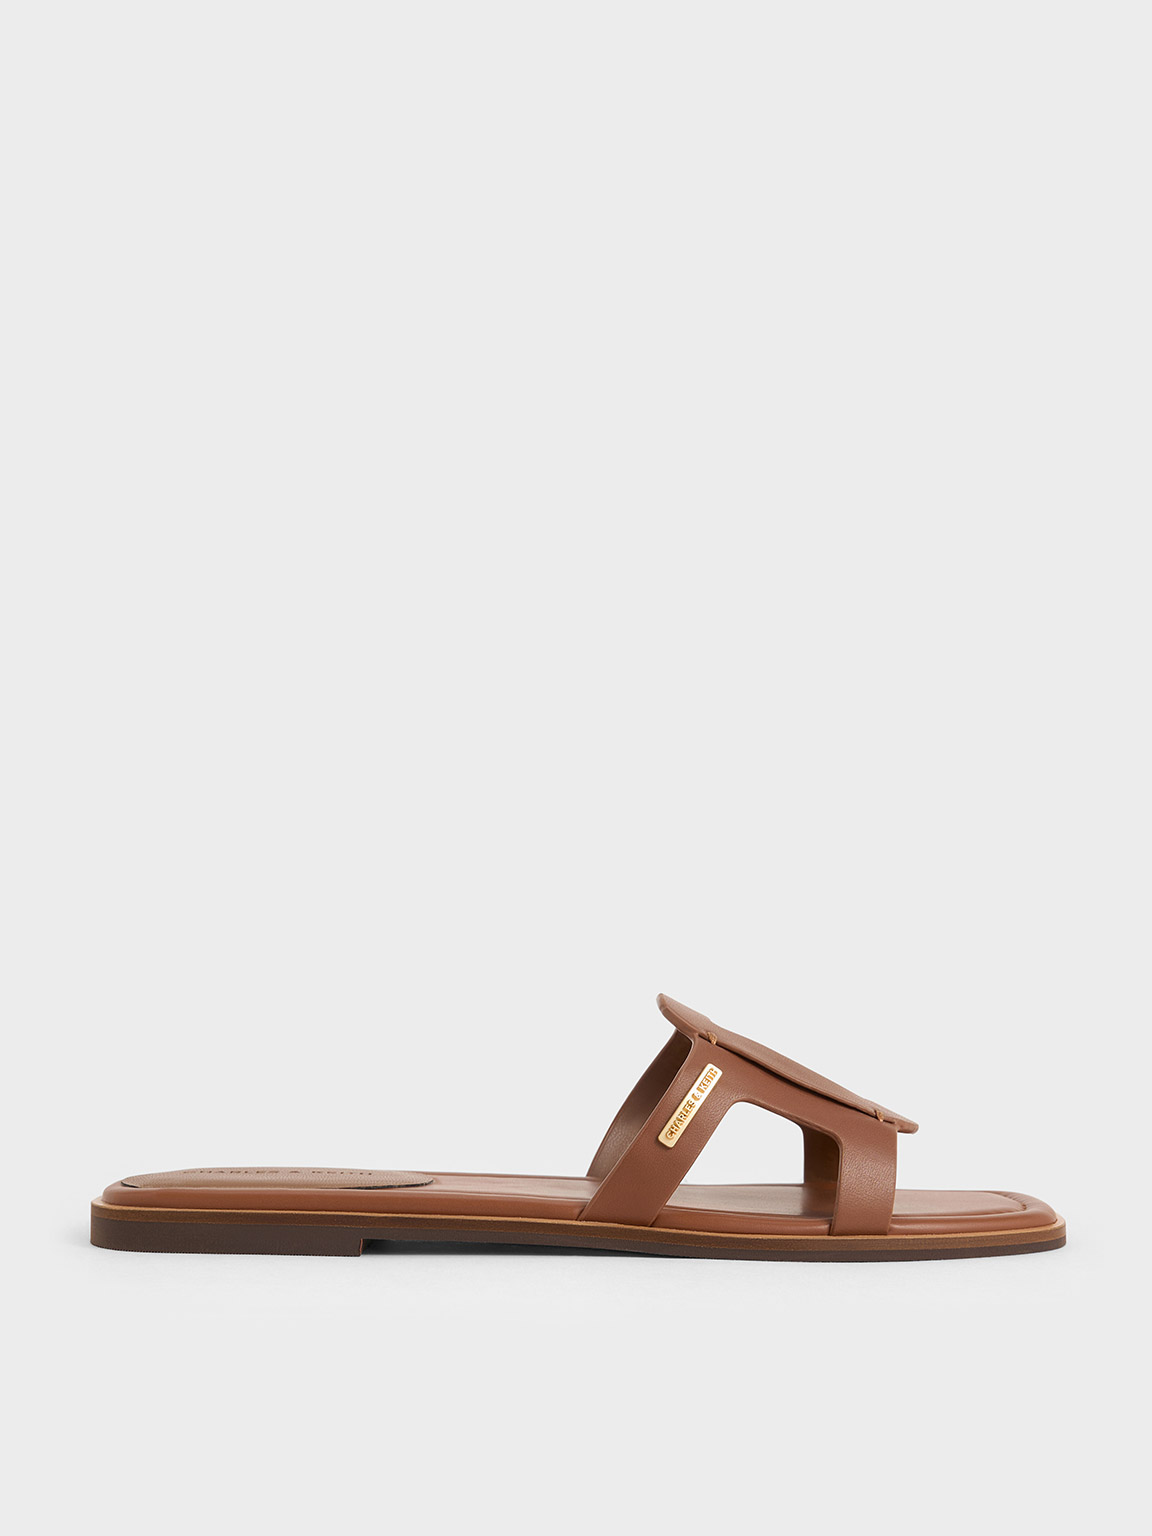 Charles & Keith Cut-out Slide Sandals In Caramel